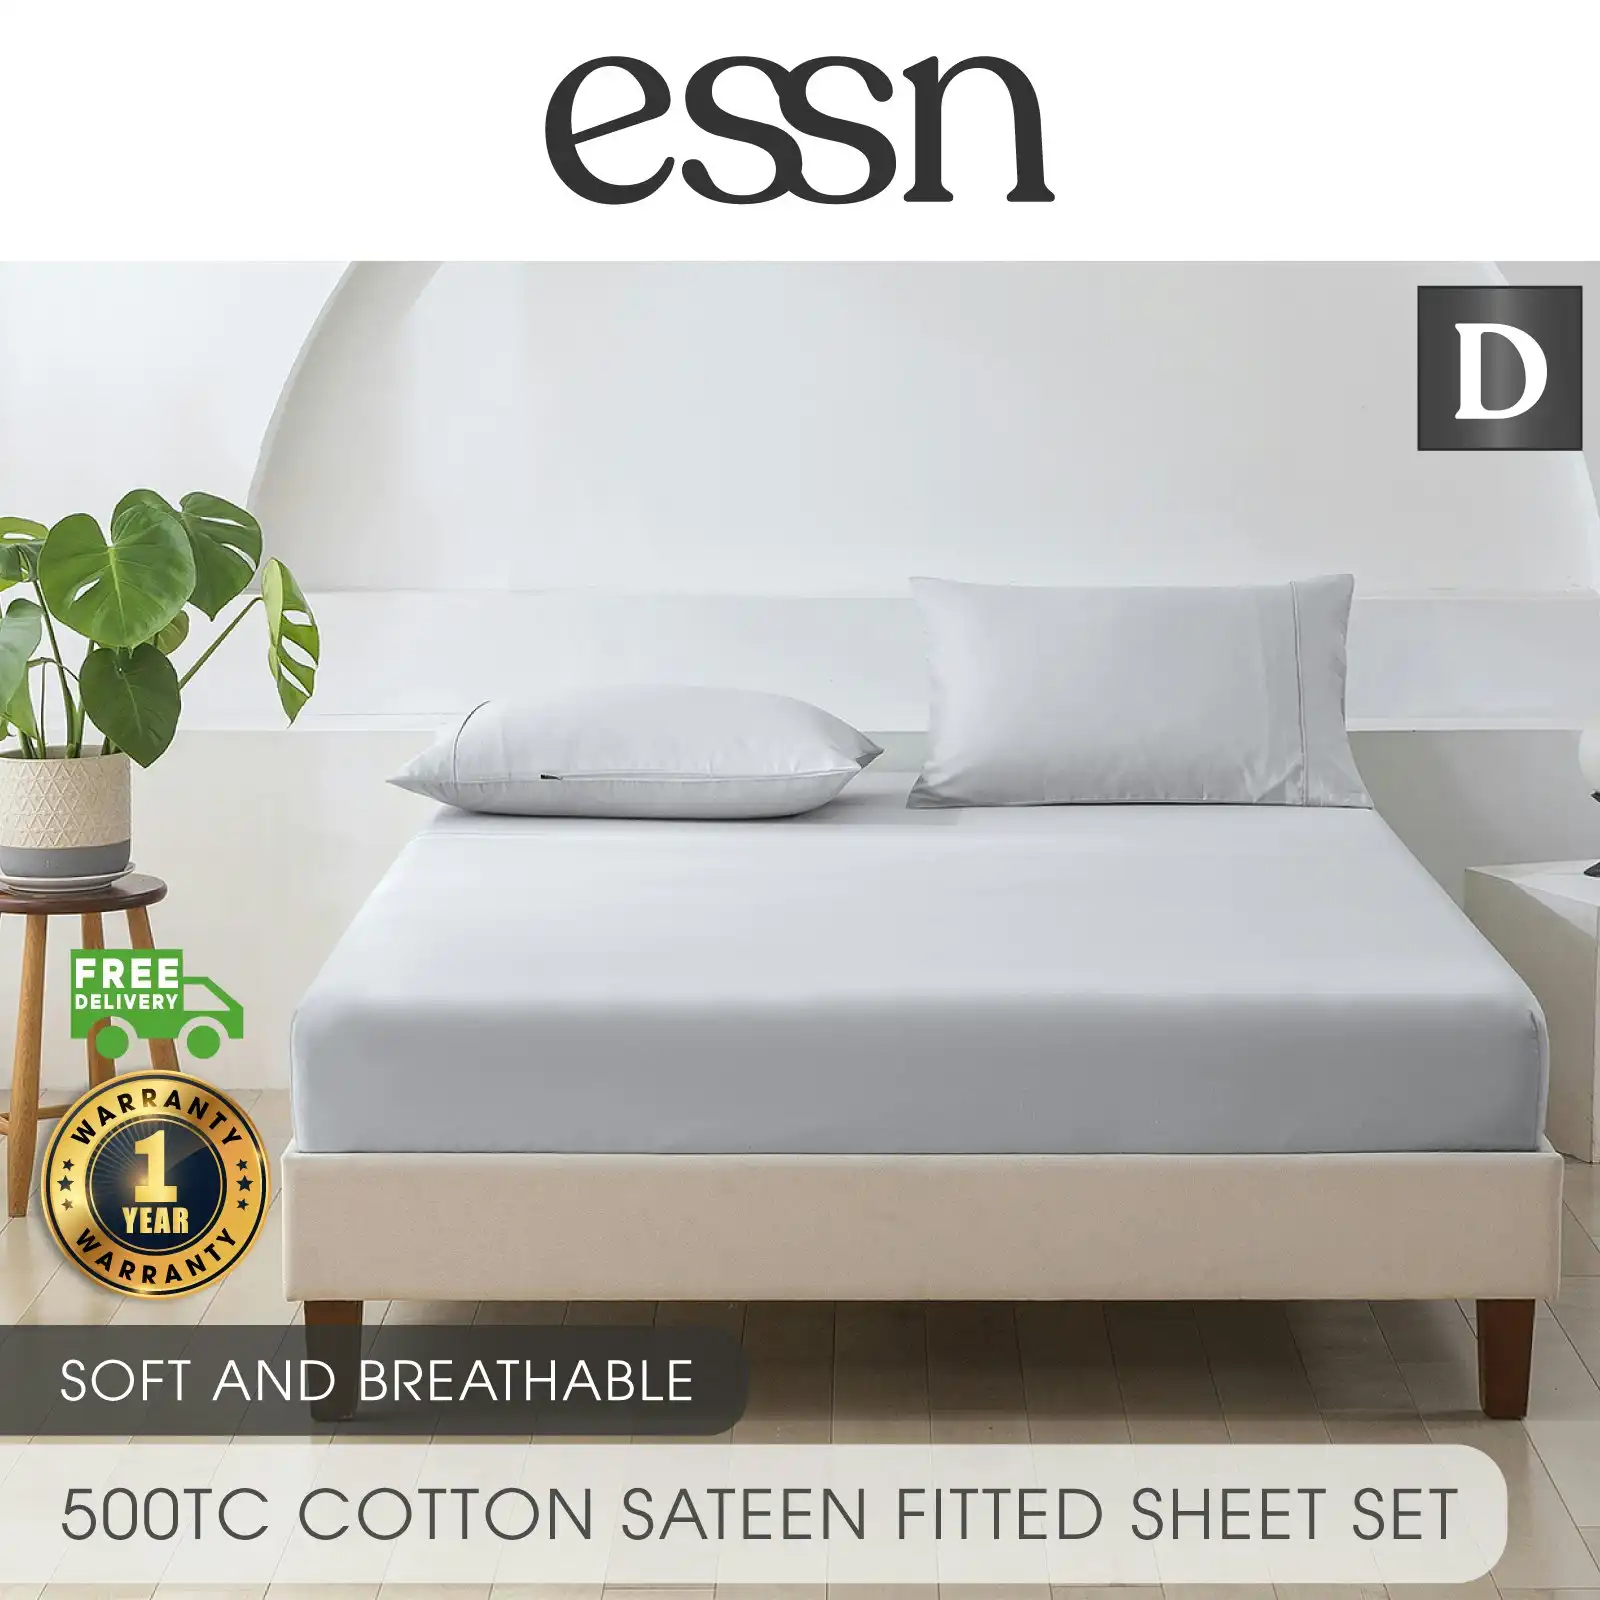 ESSN 500TC Cotton Sateen Fitted Sheet Set Silver Double Bed